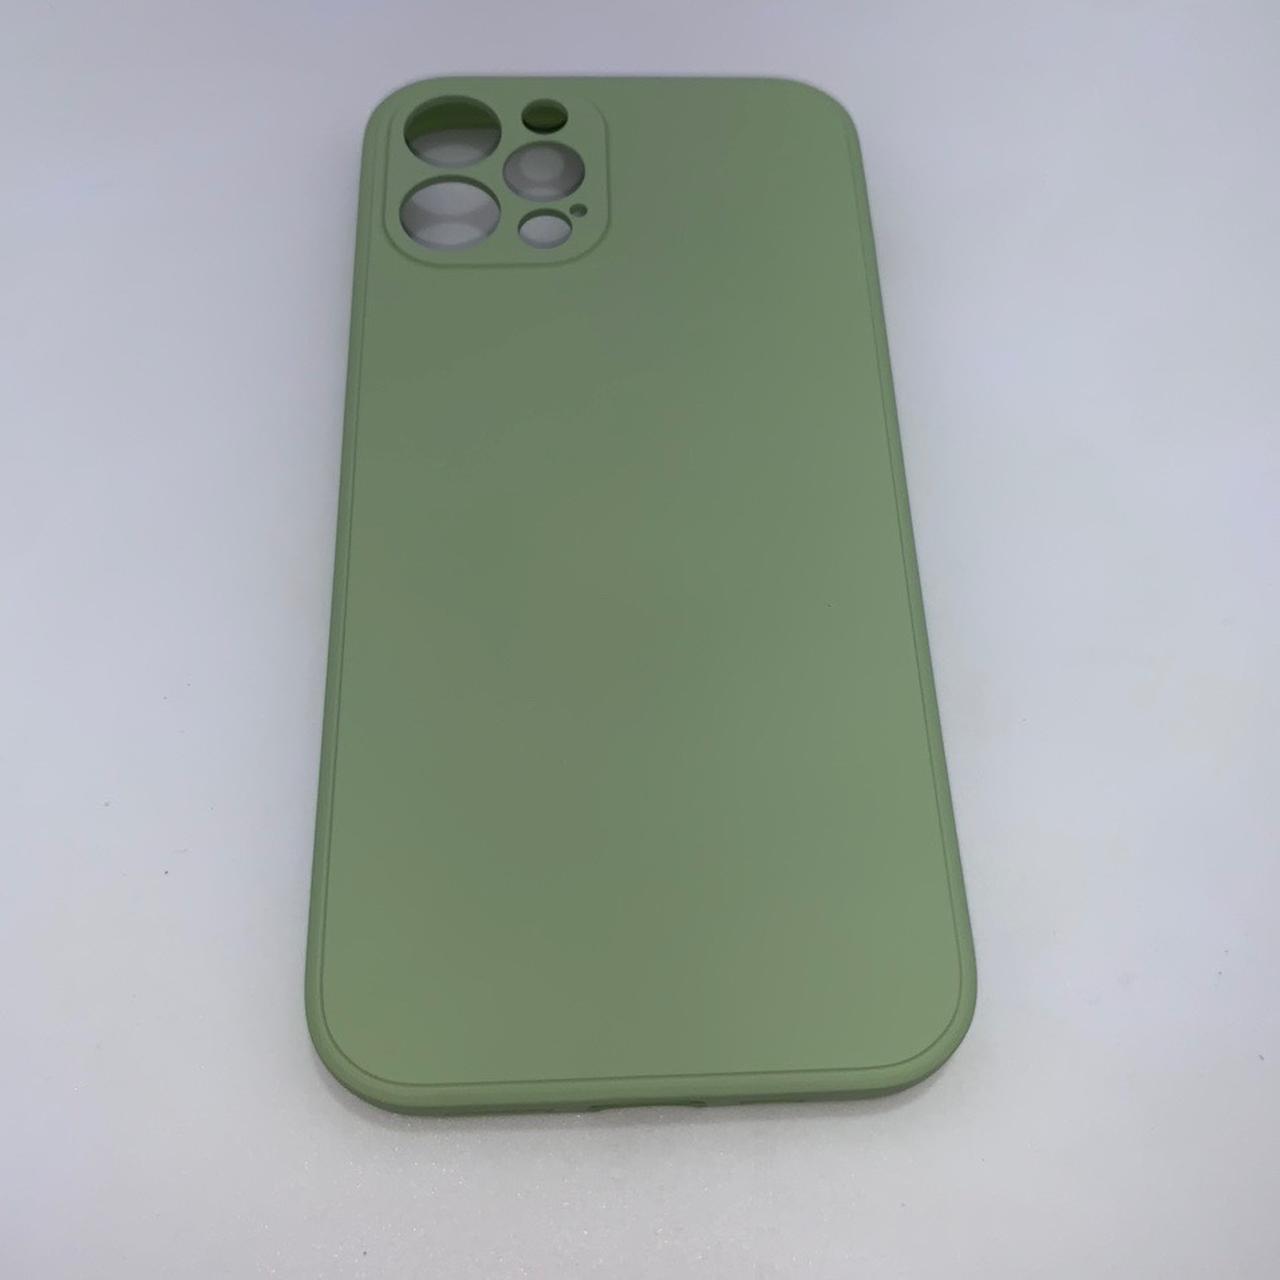 Product Image 1 - Cute simple soft silicone Mint